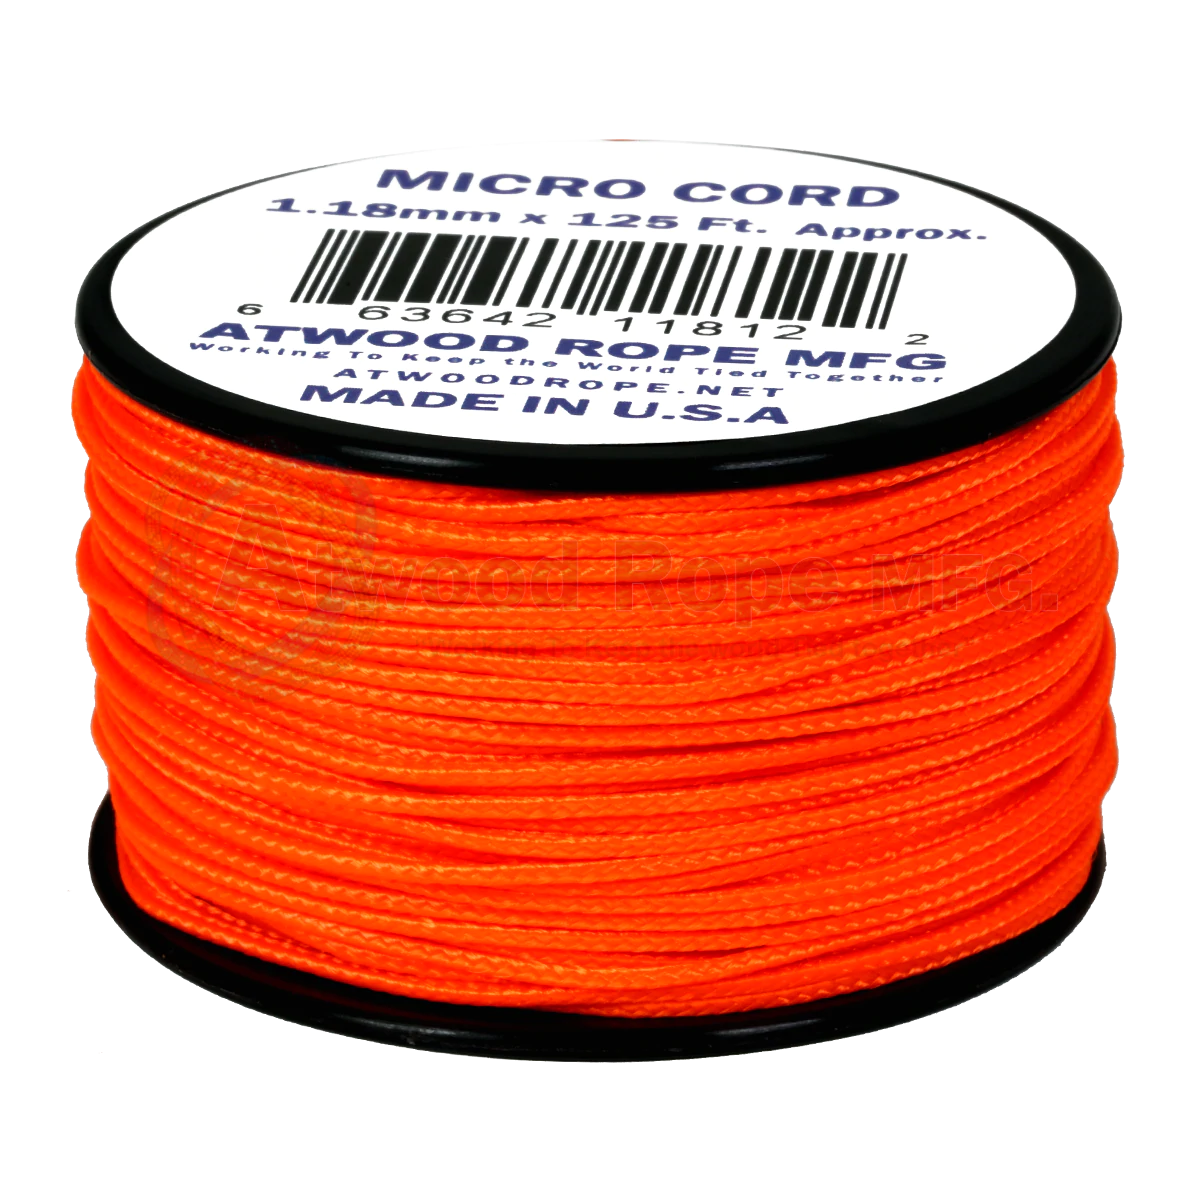 Atwood Rope MFG Micro Cord – Survival Gear Canada